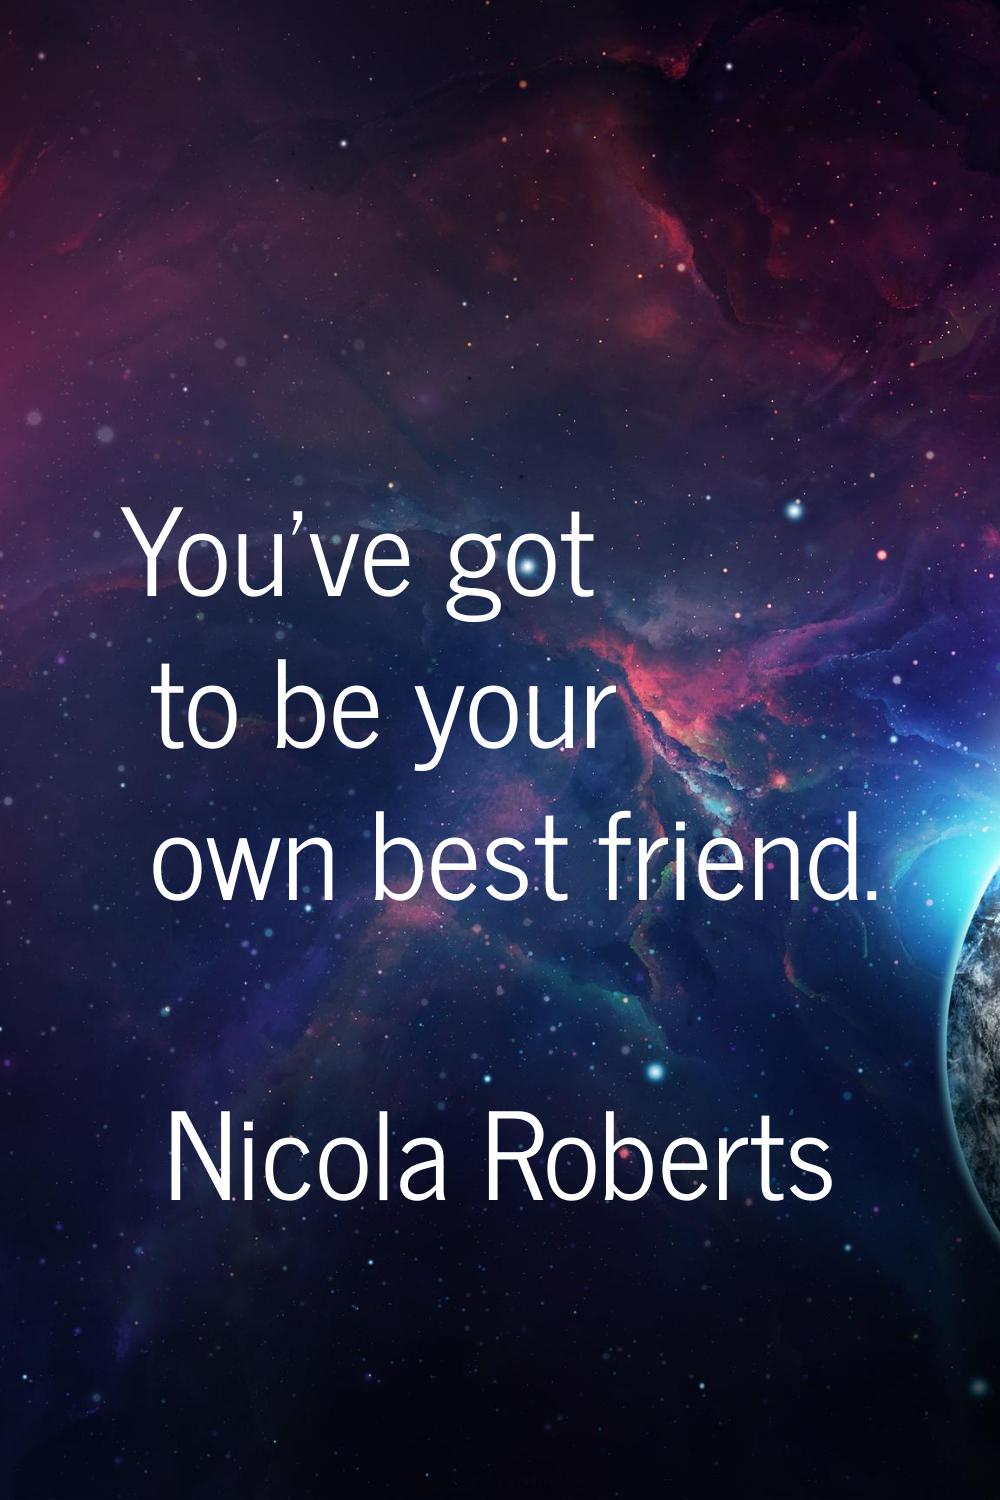 You've got to be your own best friend.